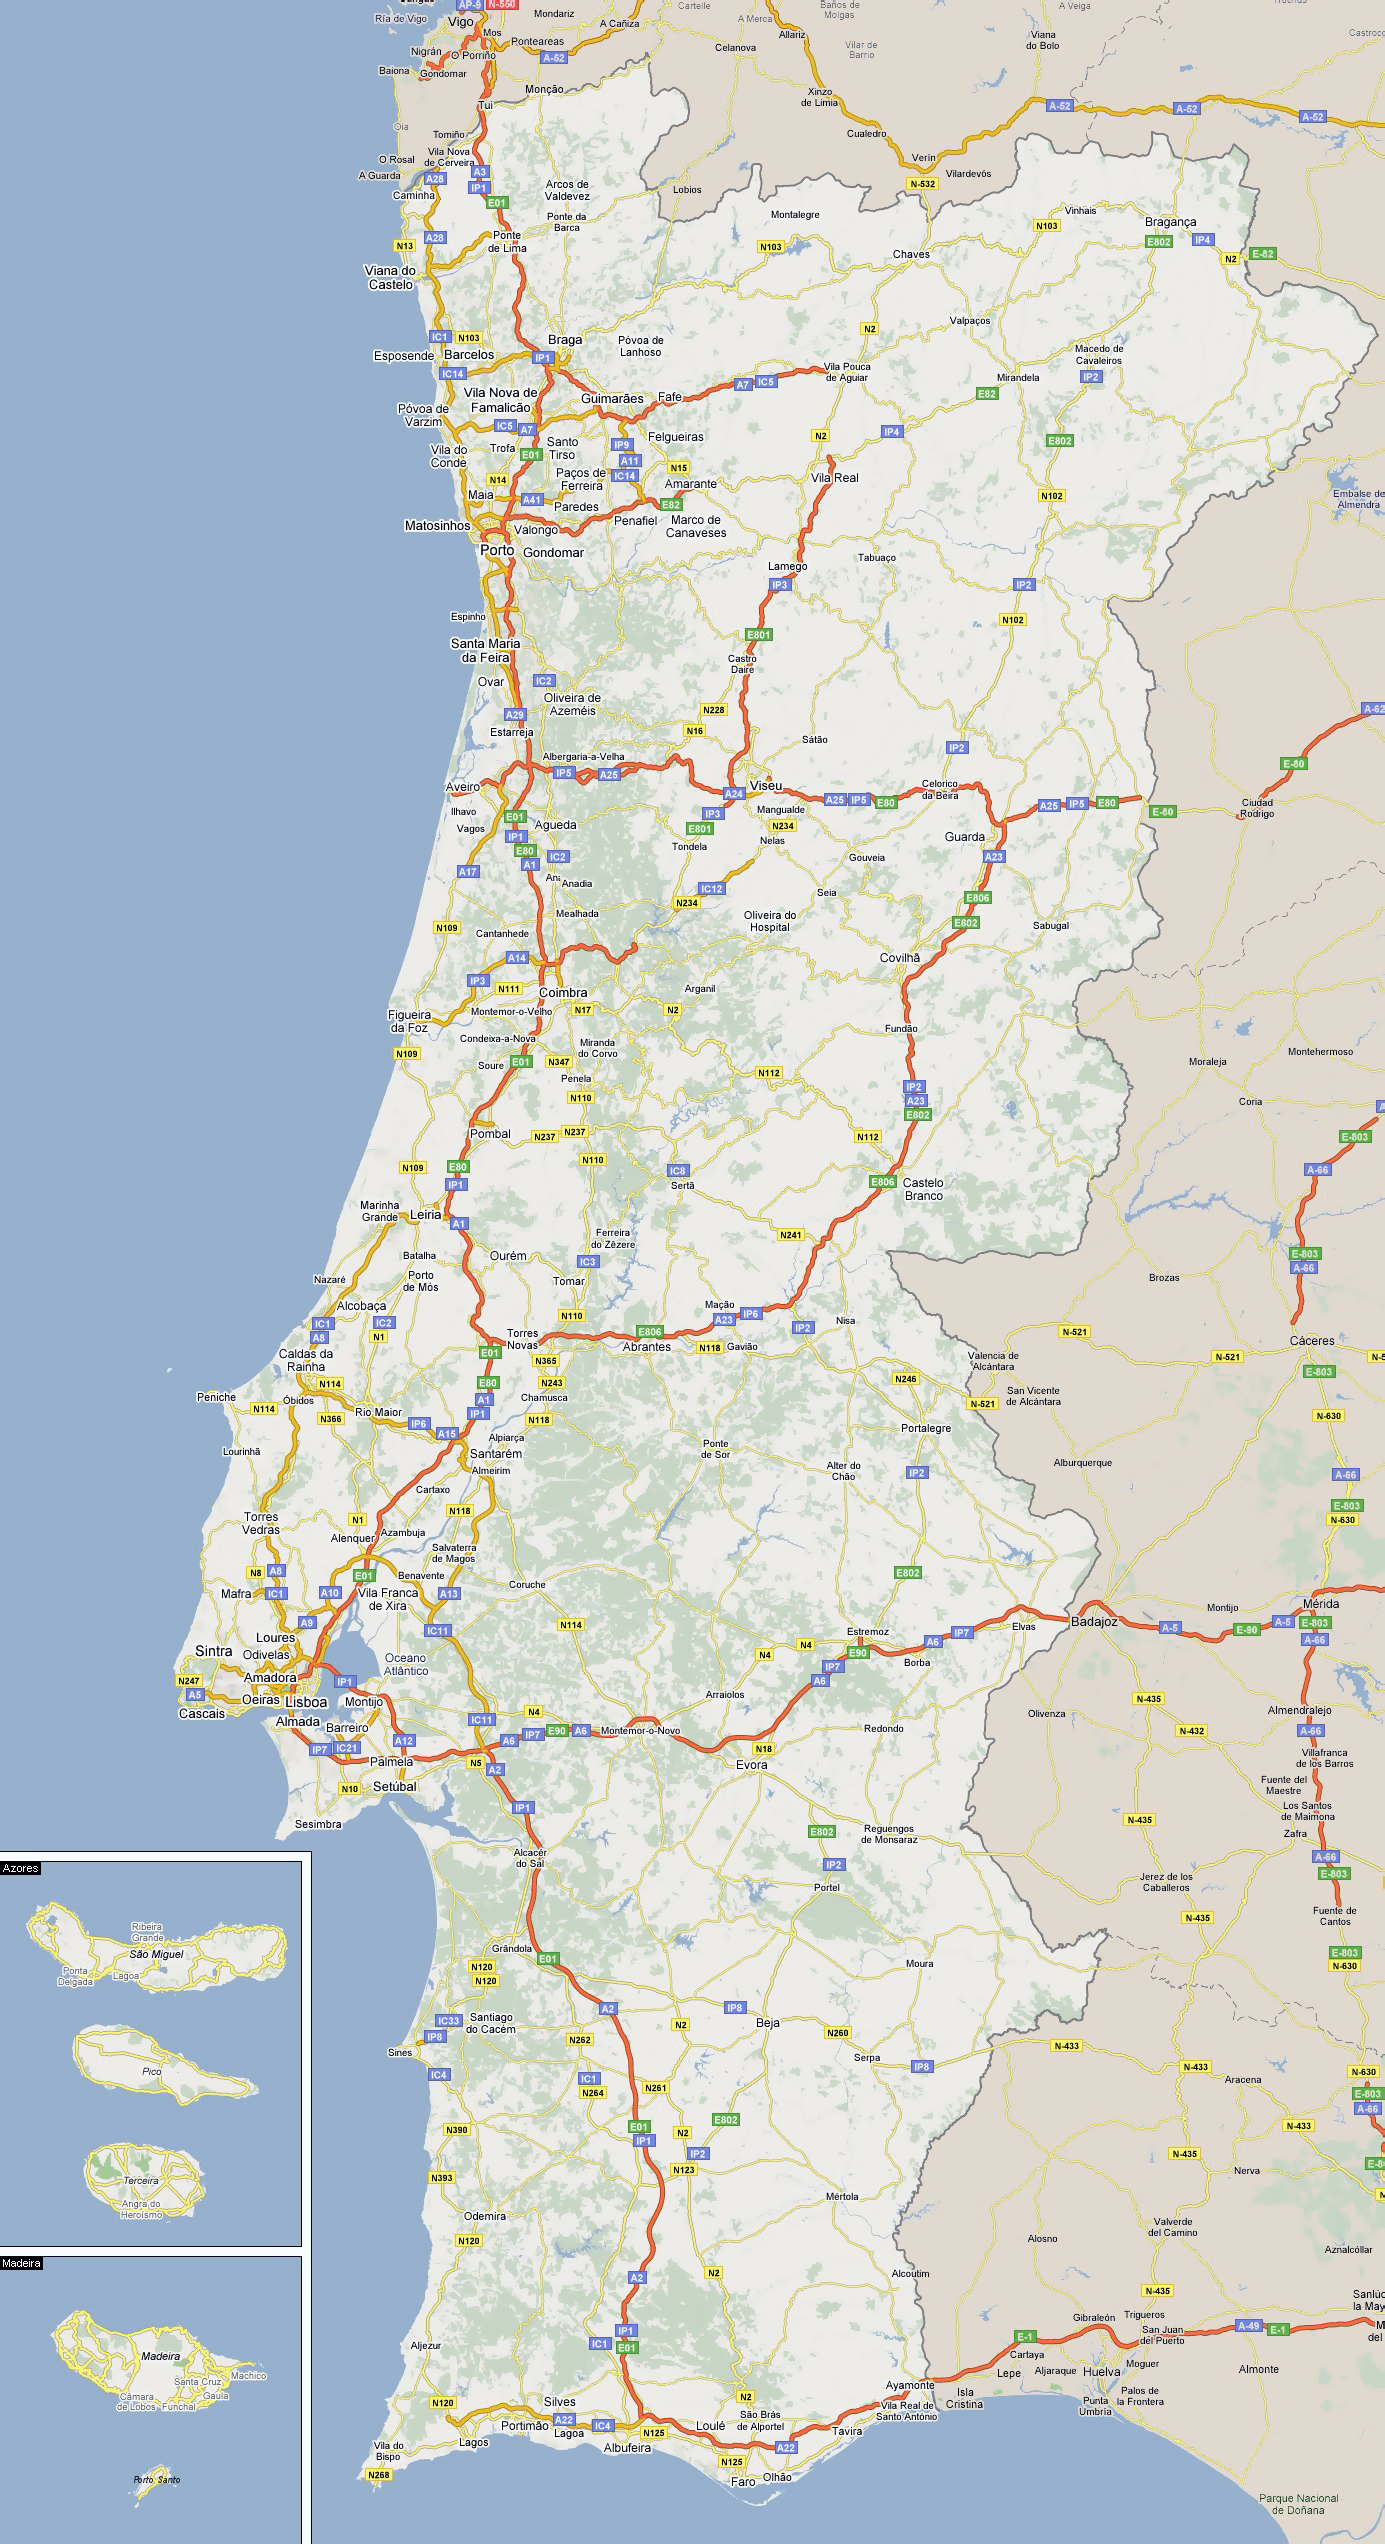 Road wall map Portugal South  Wall maps of countries of the World